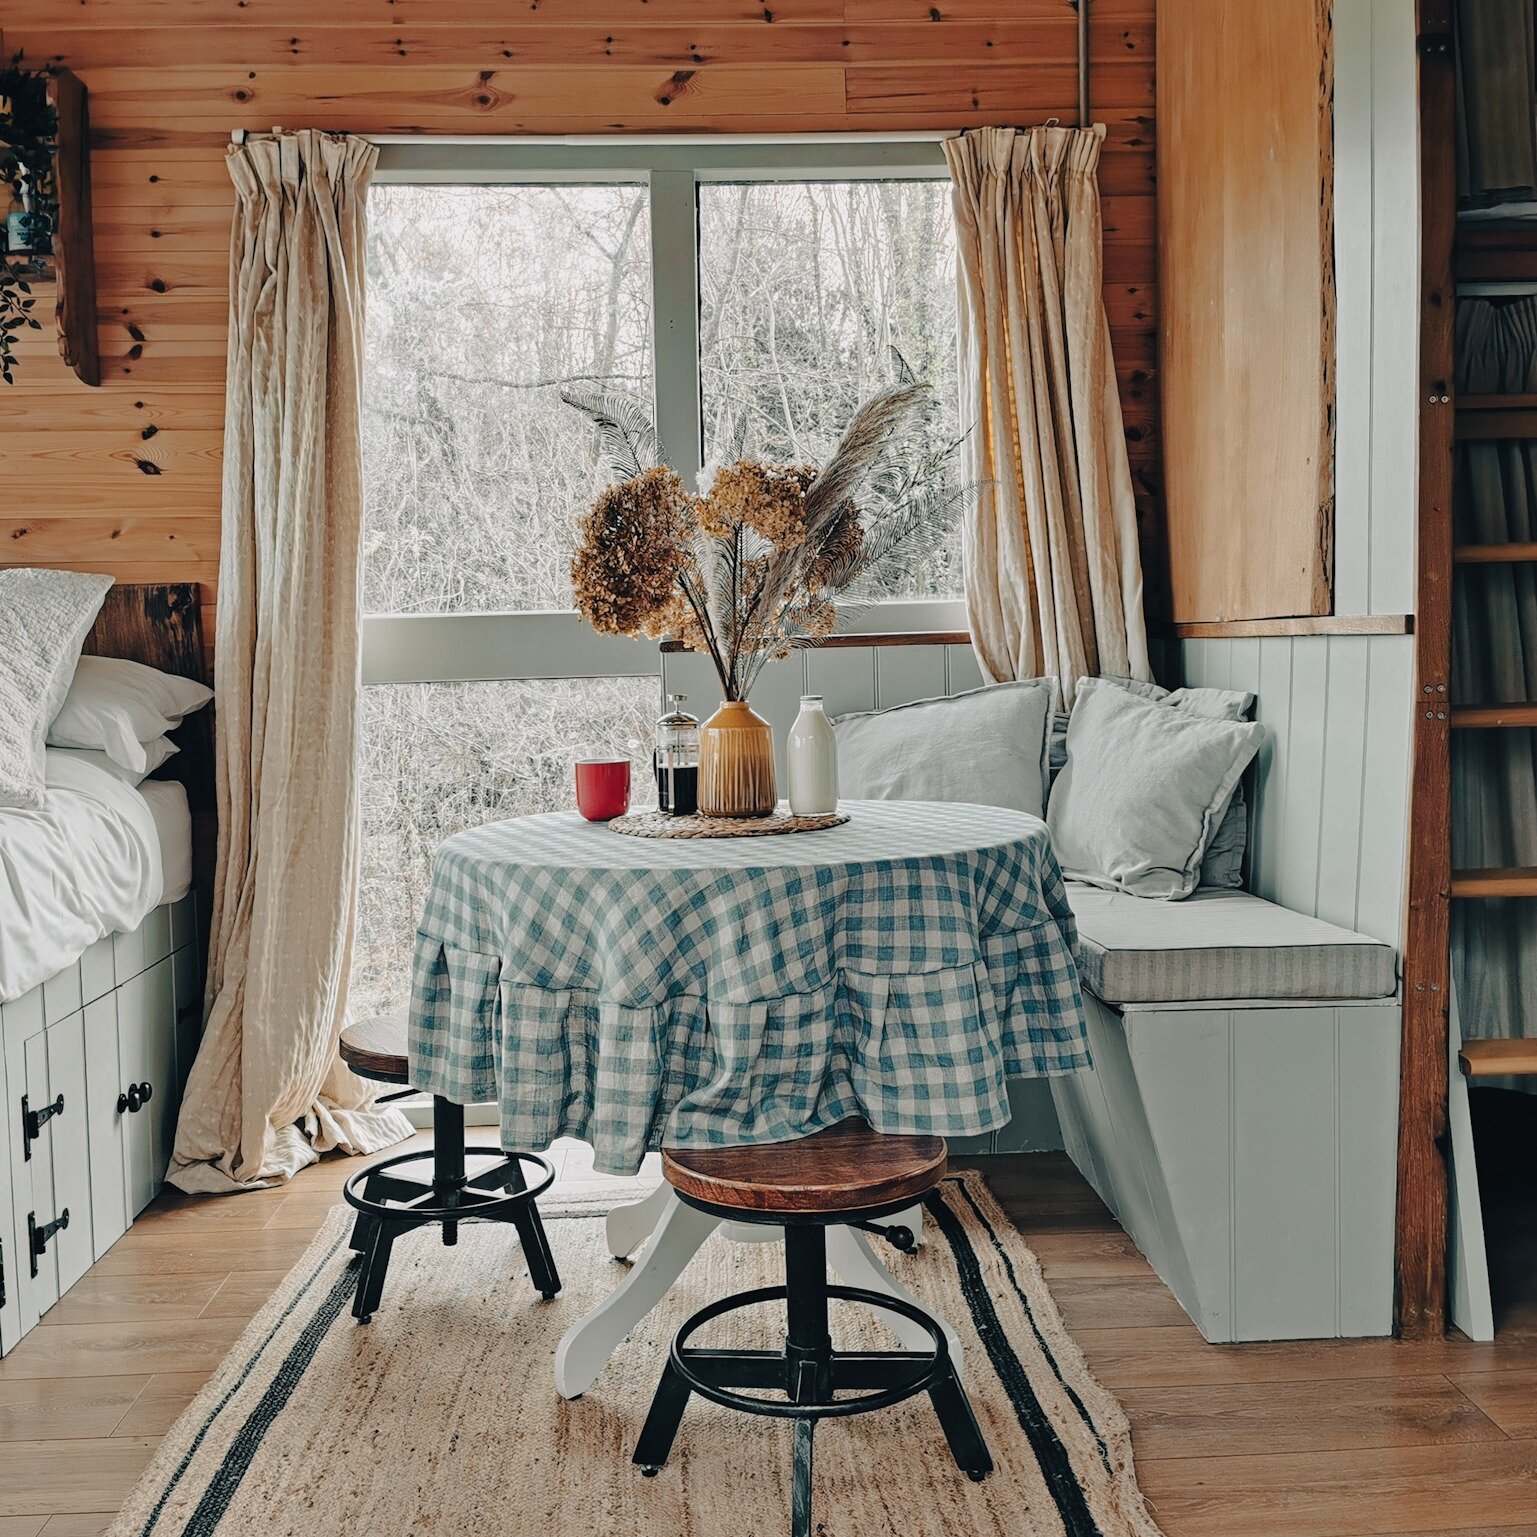 REVIEW | 'My friends and I had a wonderful weekend away glamping thanks to Susannah's wonderful hospitality. The hut was tranquil and incredibly peaceful and private. Waking up to the birds and watching the stars at night in the hot tub was dreamy! I